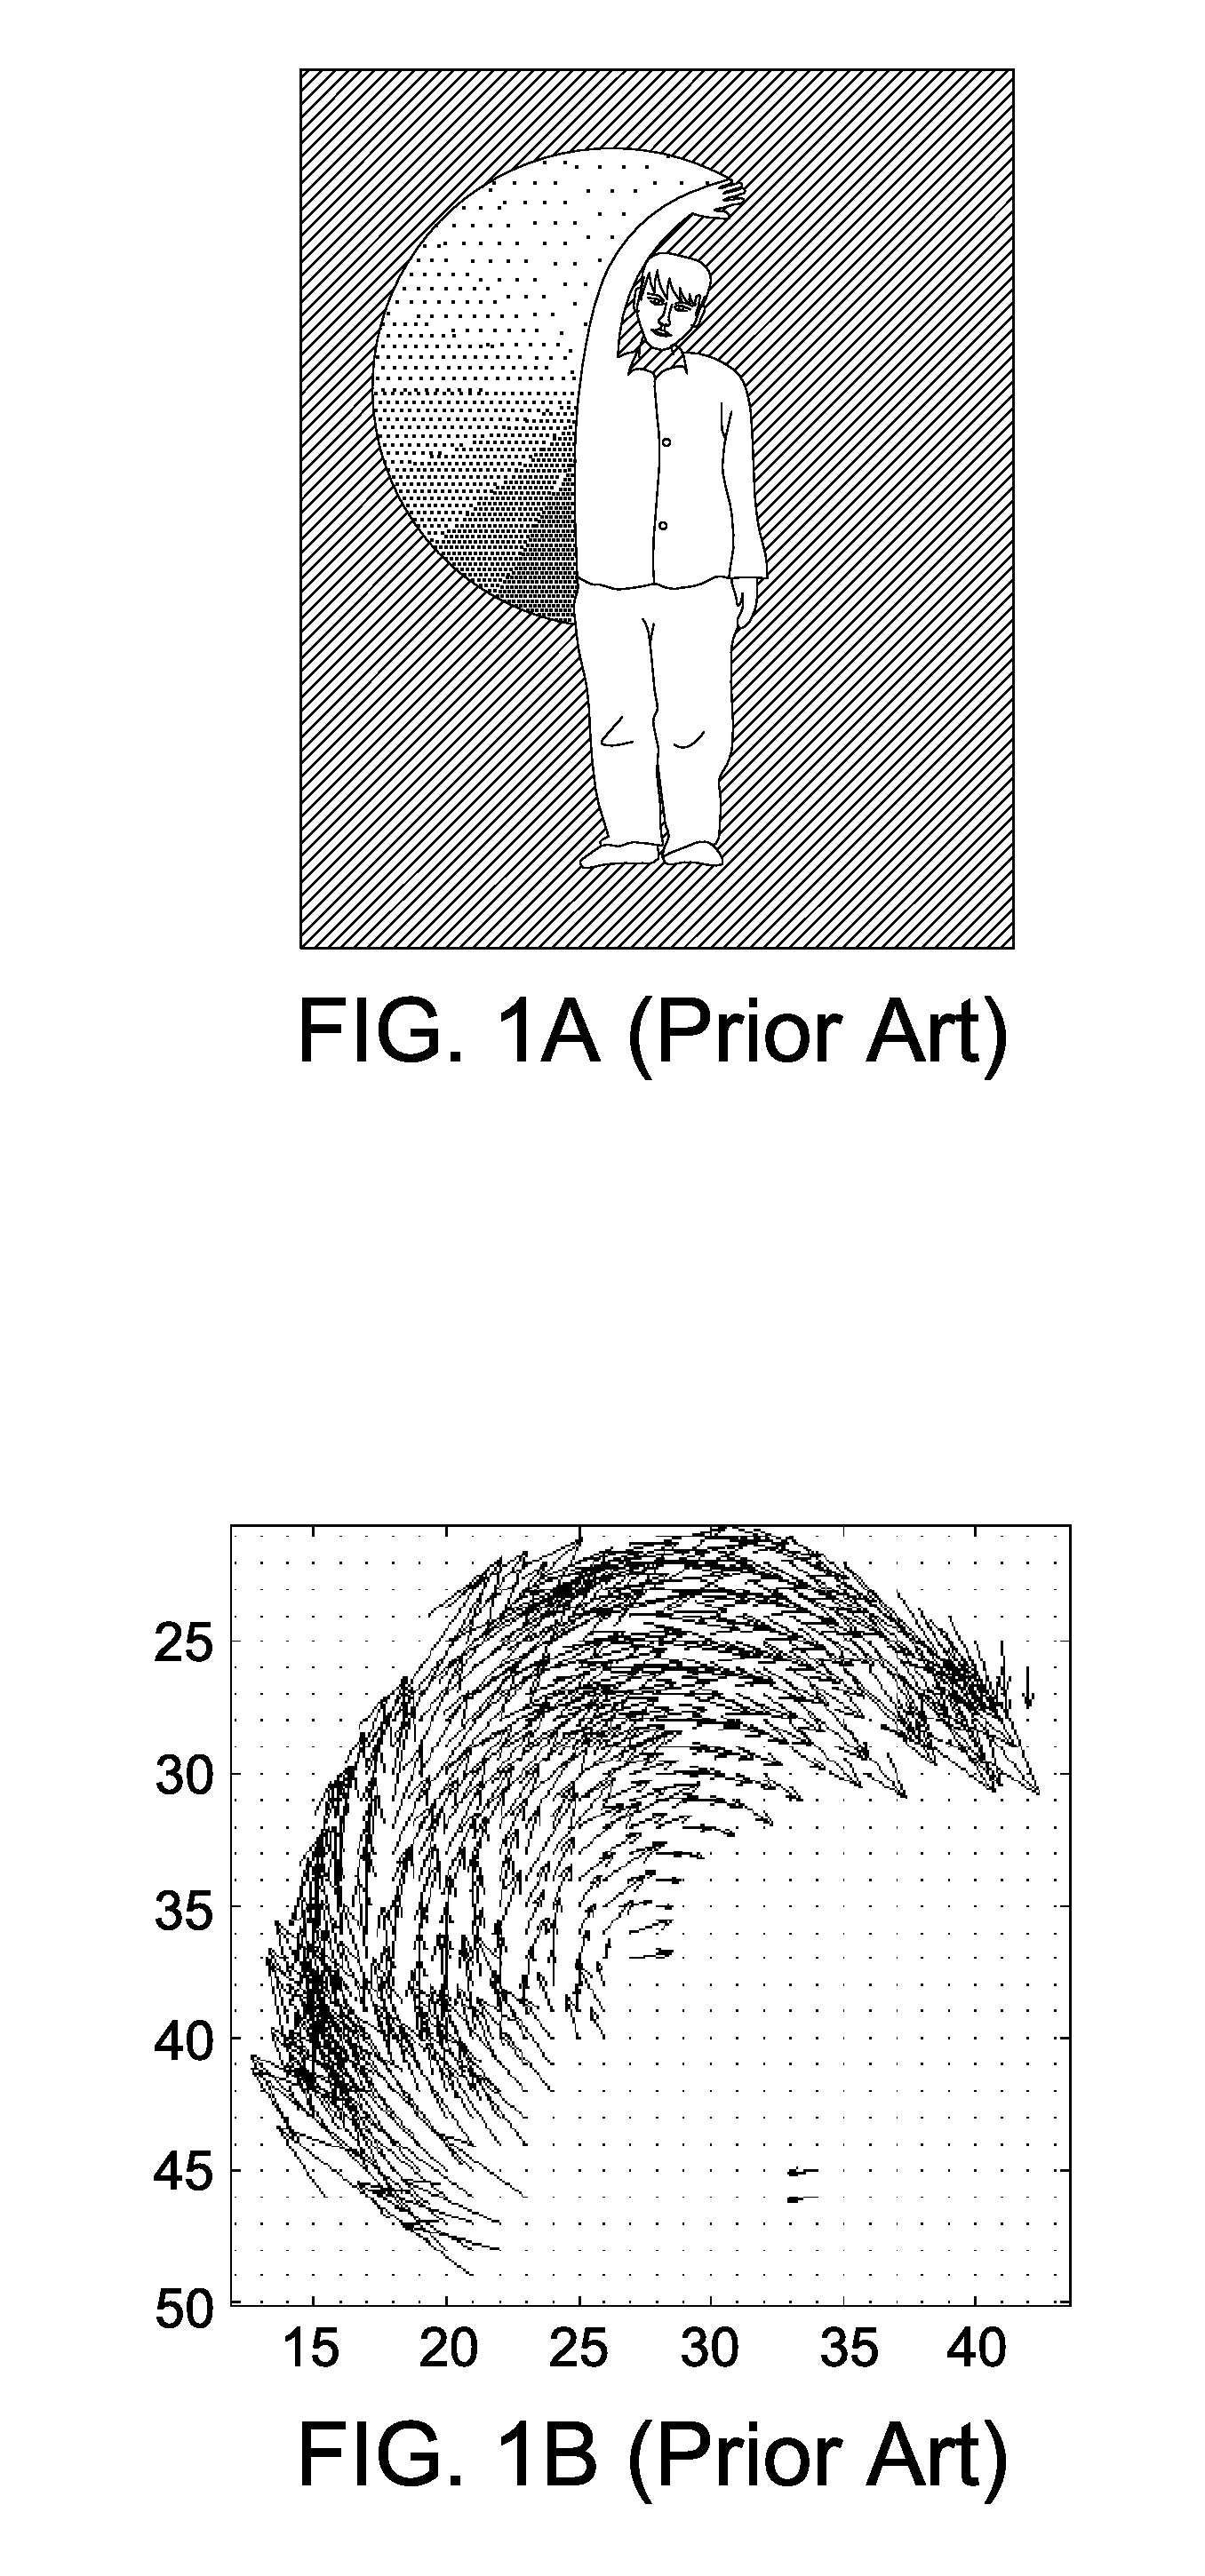 Gesture judgment method used in an electronic device